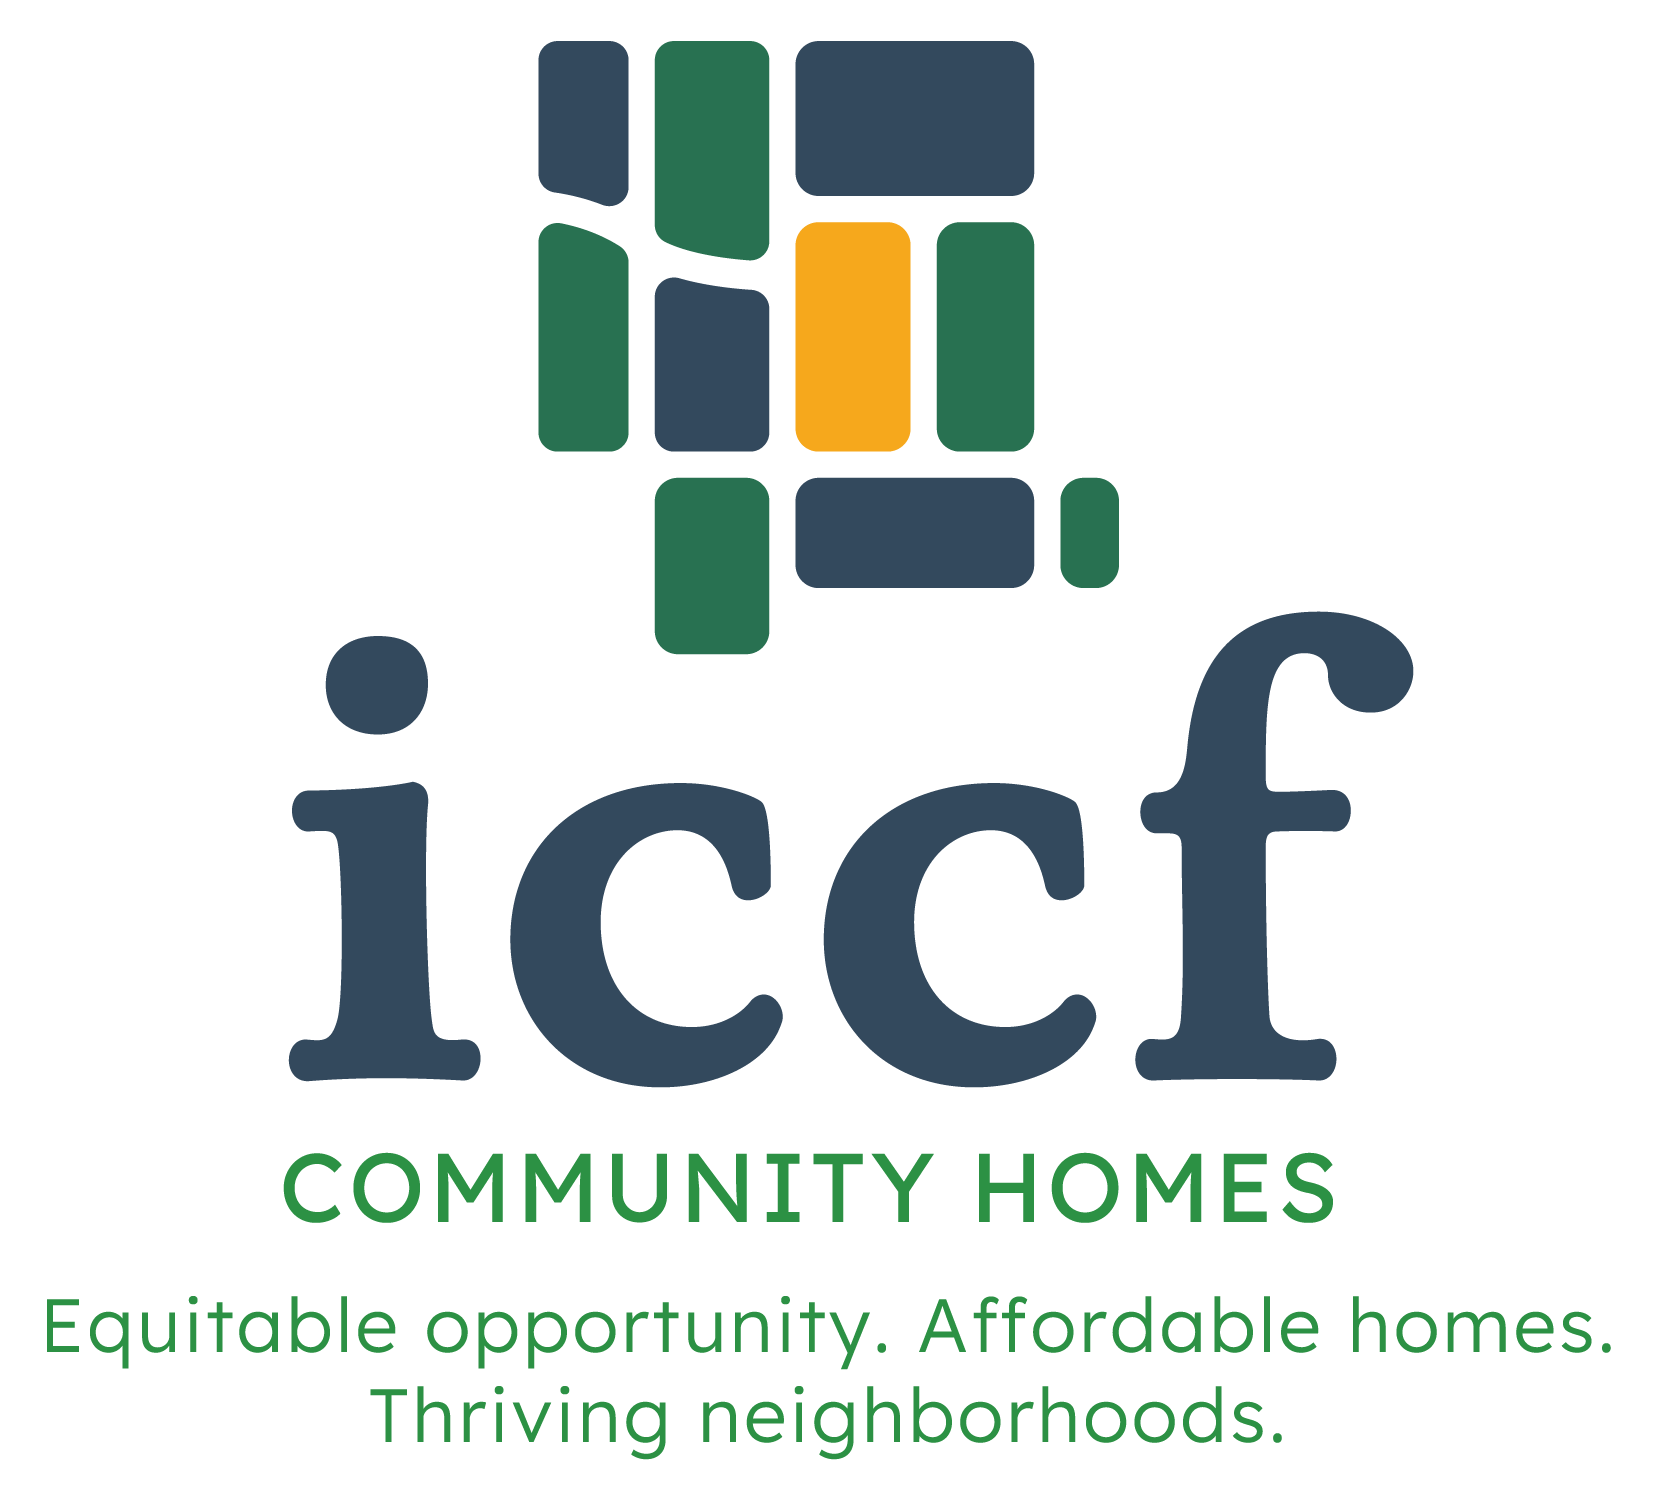 ICCF Community Homes Vertical Format Logo w/ mission statement